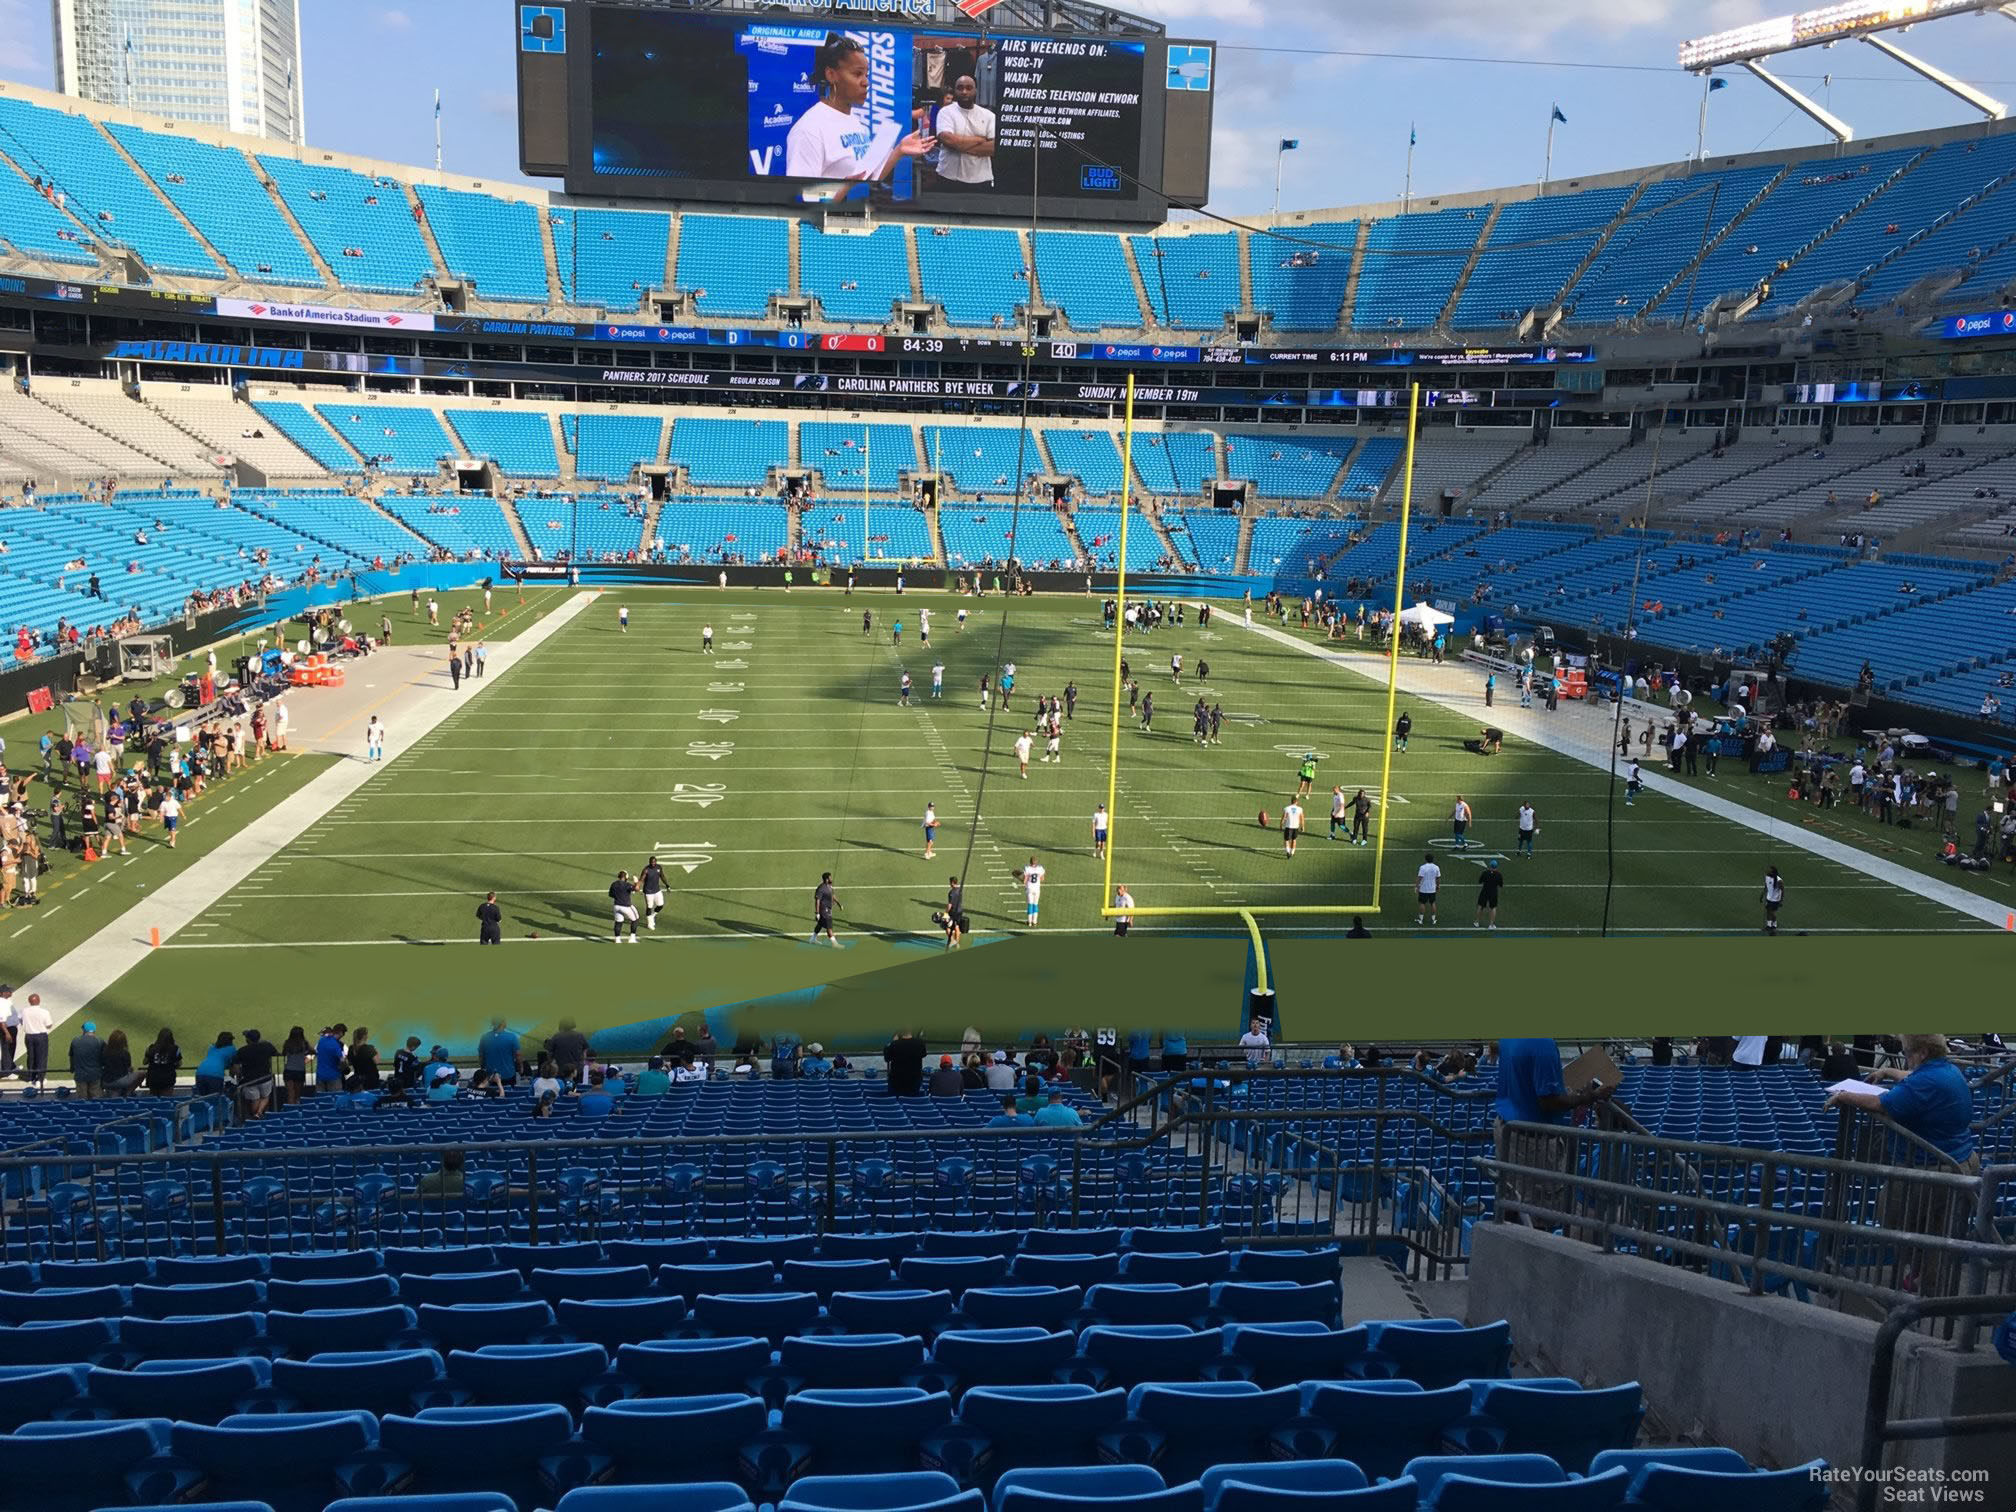 section 202, row 10 seat view  for football - bank of america stadium